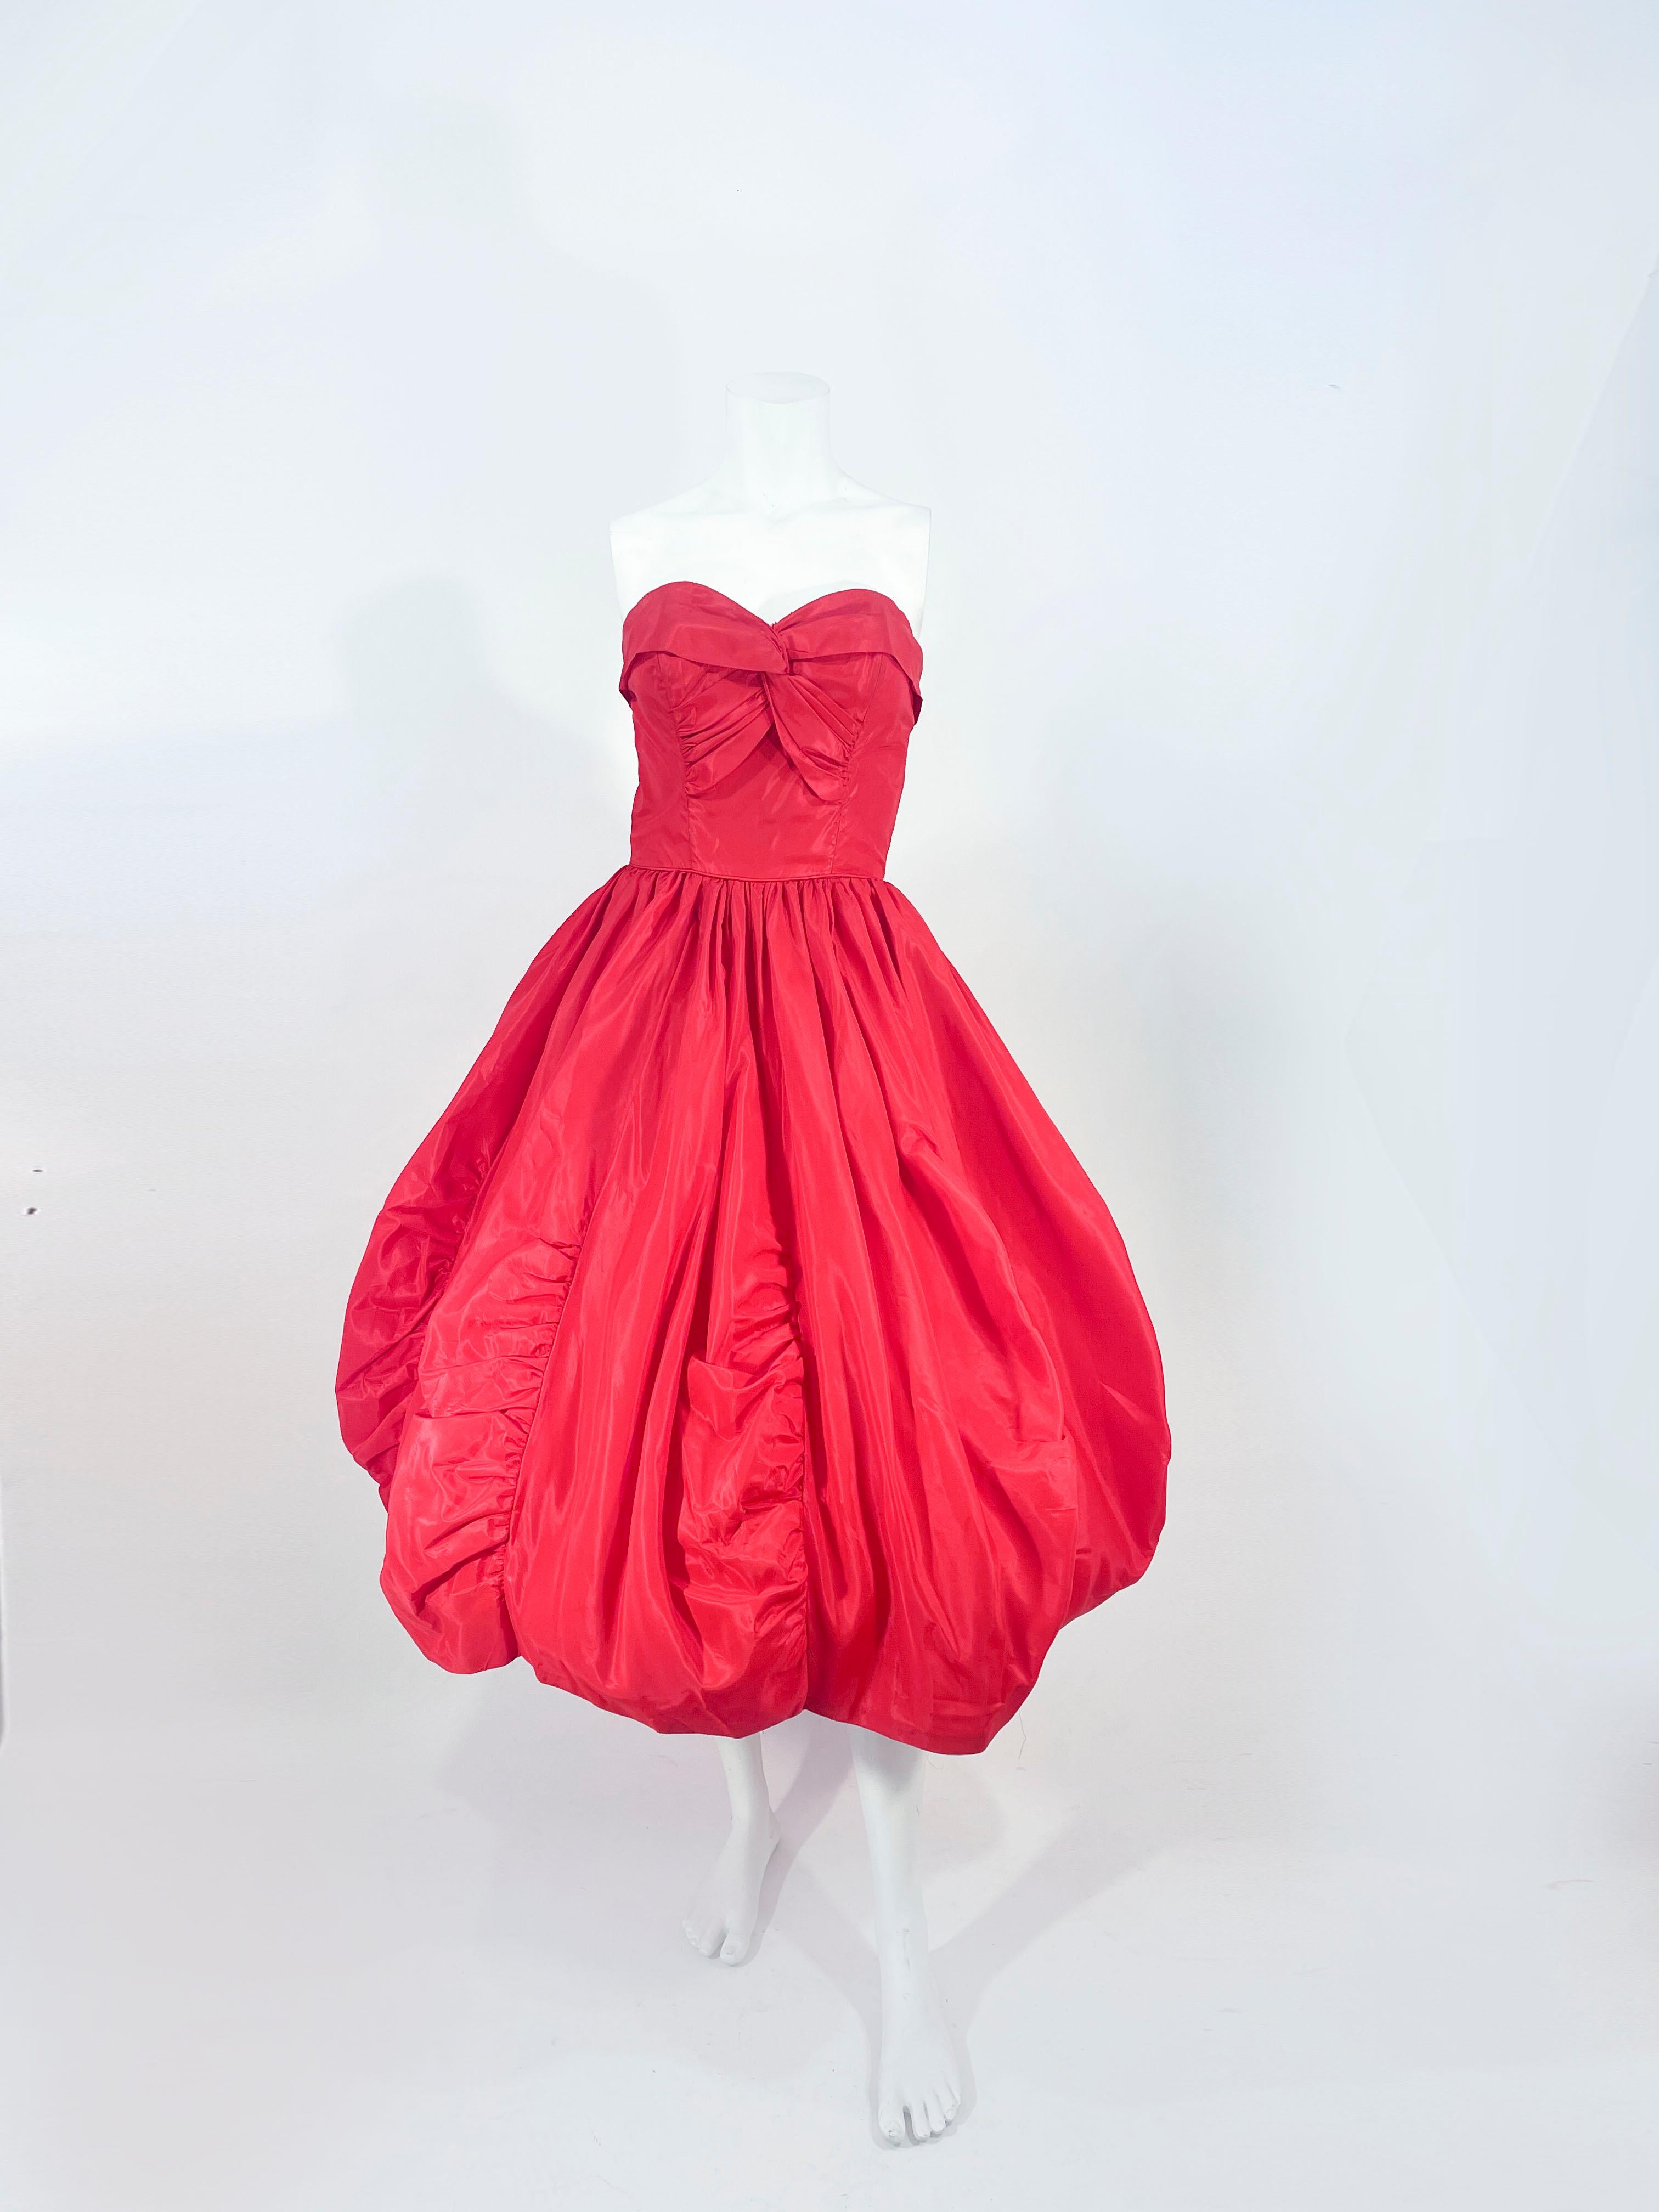 1950s Red taffeta party dress featuring a ruffled and paneled bubble hem. The bodice is adorned with folded and gathered details, interior boning for structure, and a pipped waist. 

The back has a metal zipper and the dress is unlined. The skirt